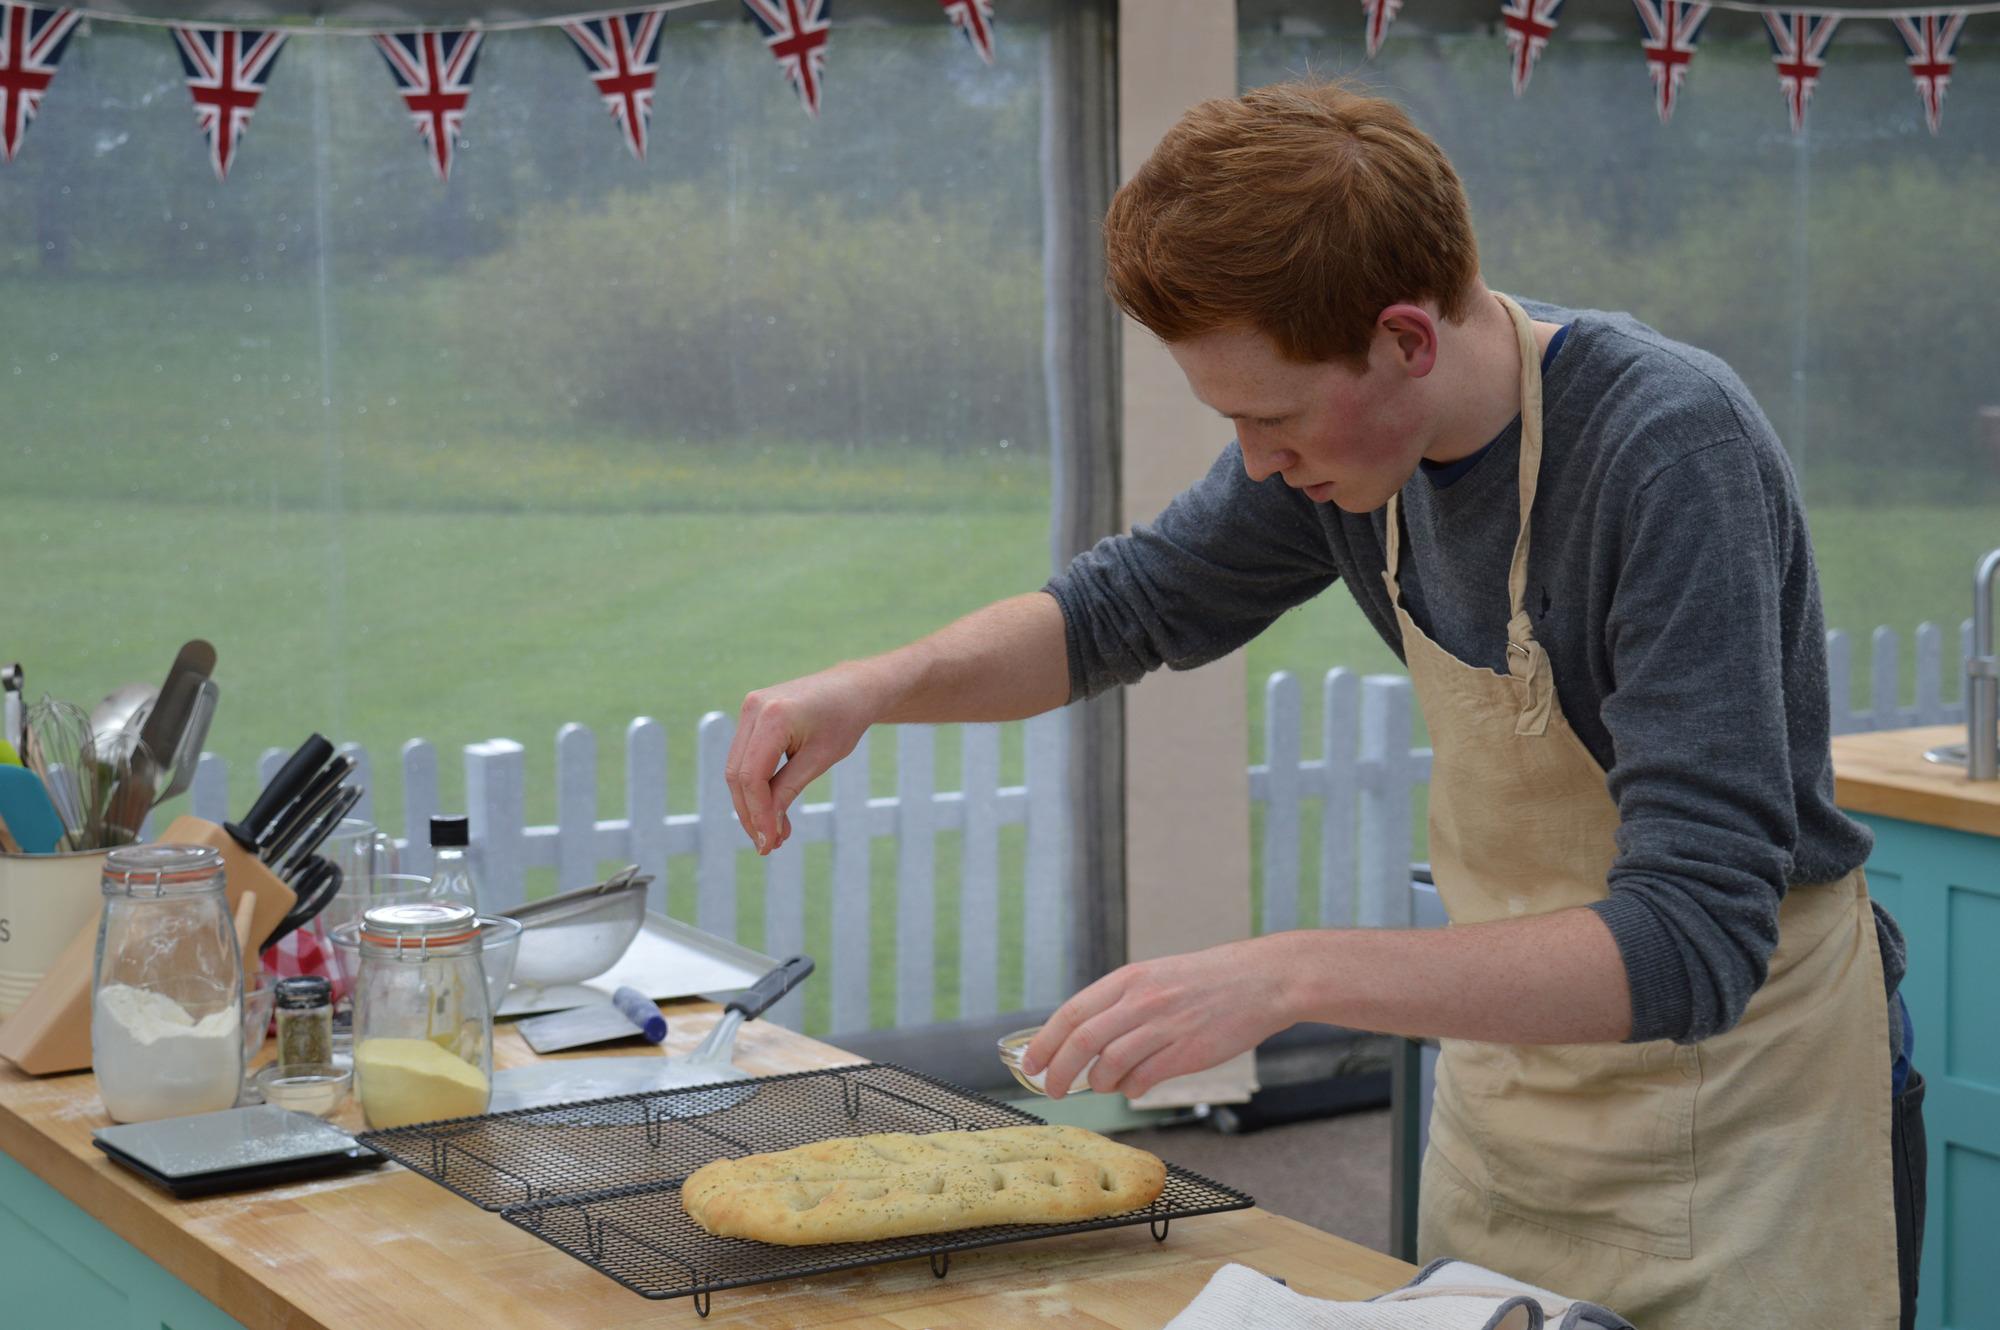 Andrew adds a sprinkle of salt to his herby bread during the technical challenge (BBC)